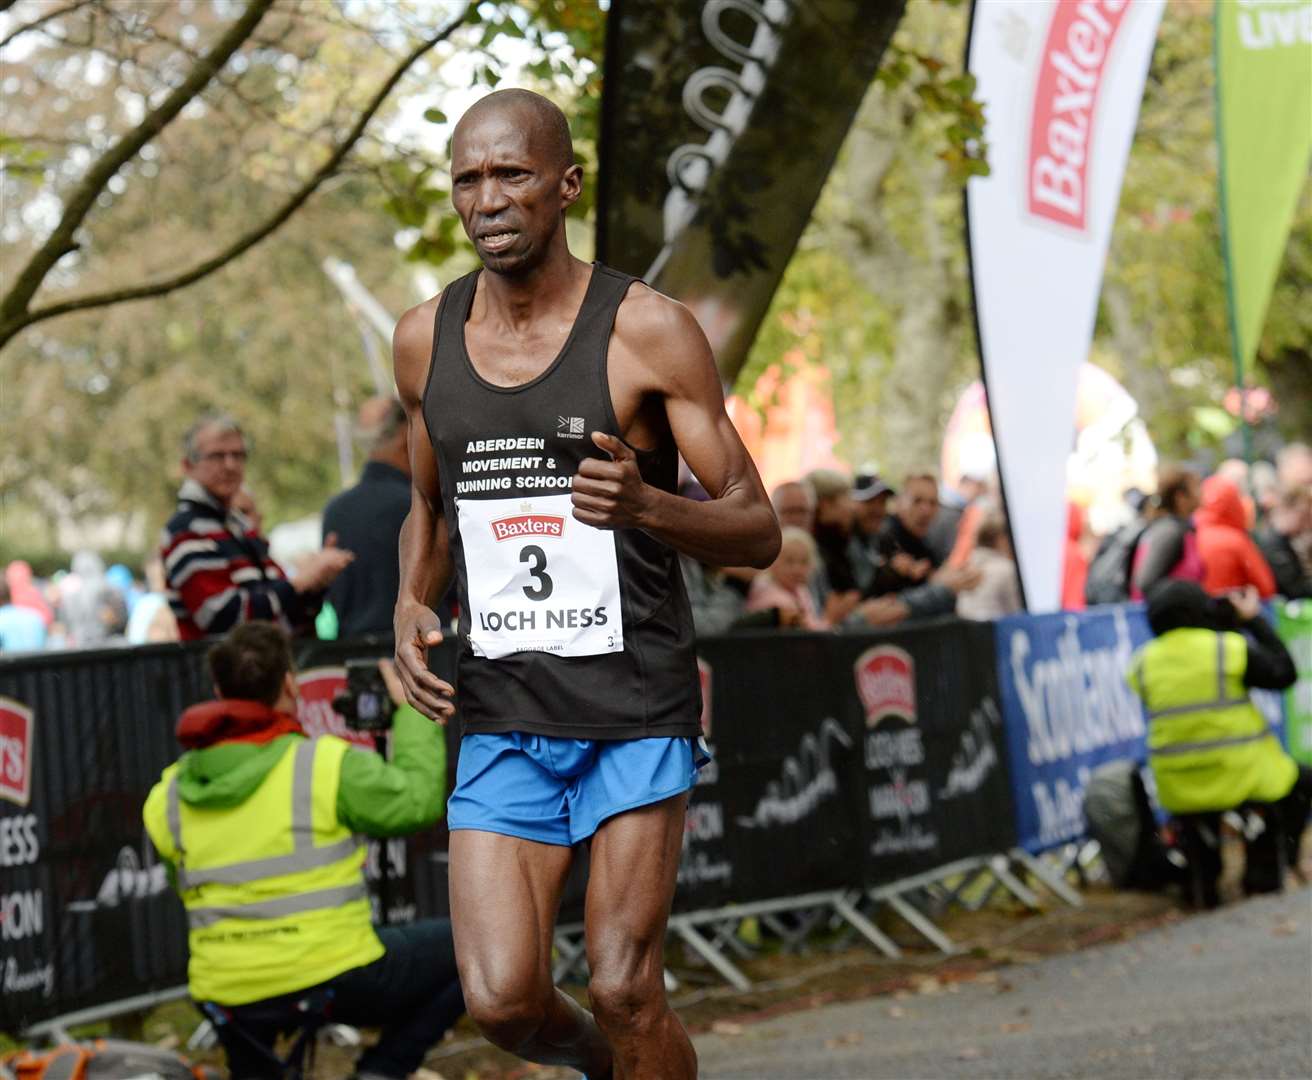 Isaiah Kosgei is aiming to win his first Loch Ness Marathon on Sunday – and the course record would be the cherry on top. Picture: Gary Anthony